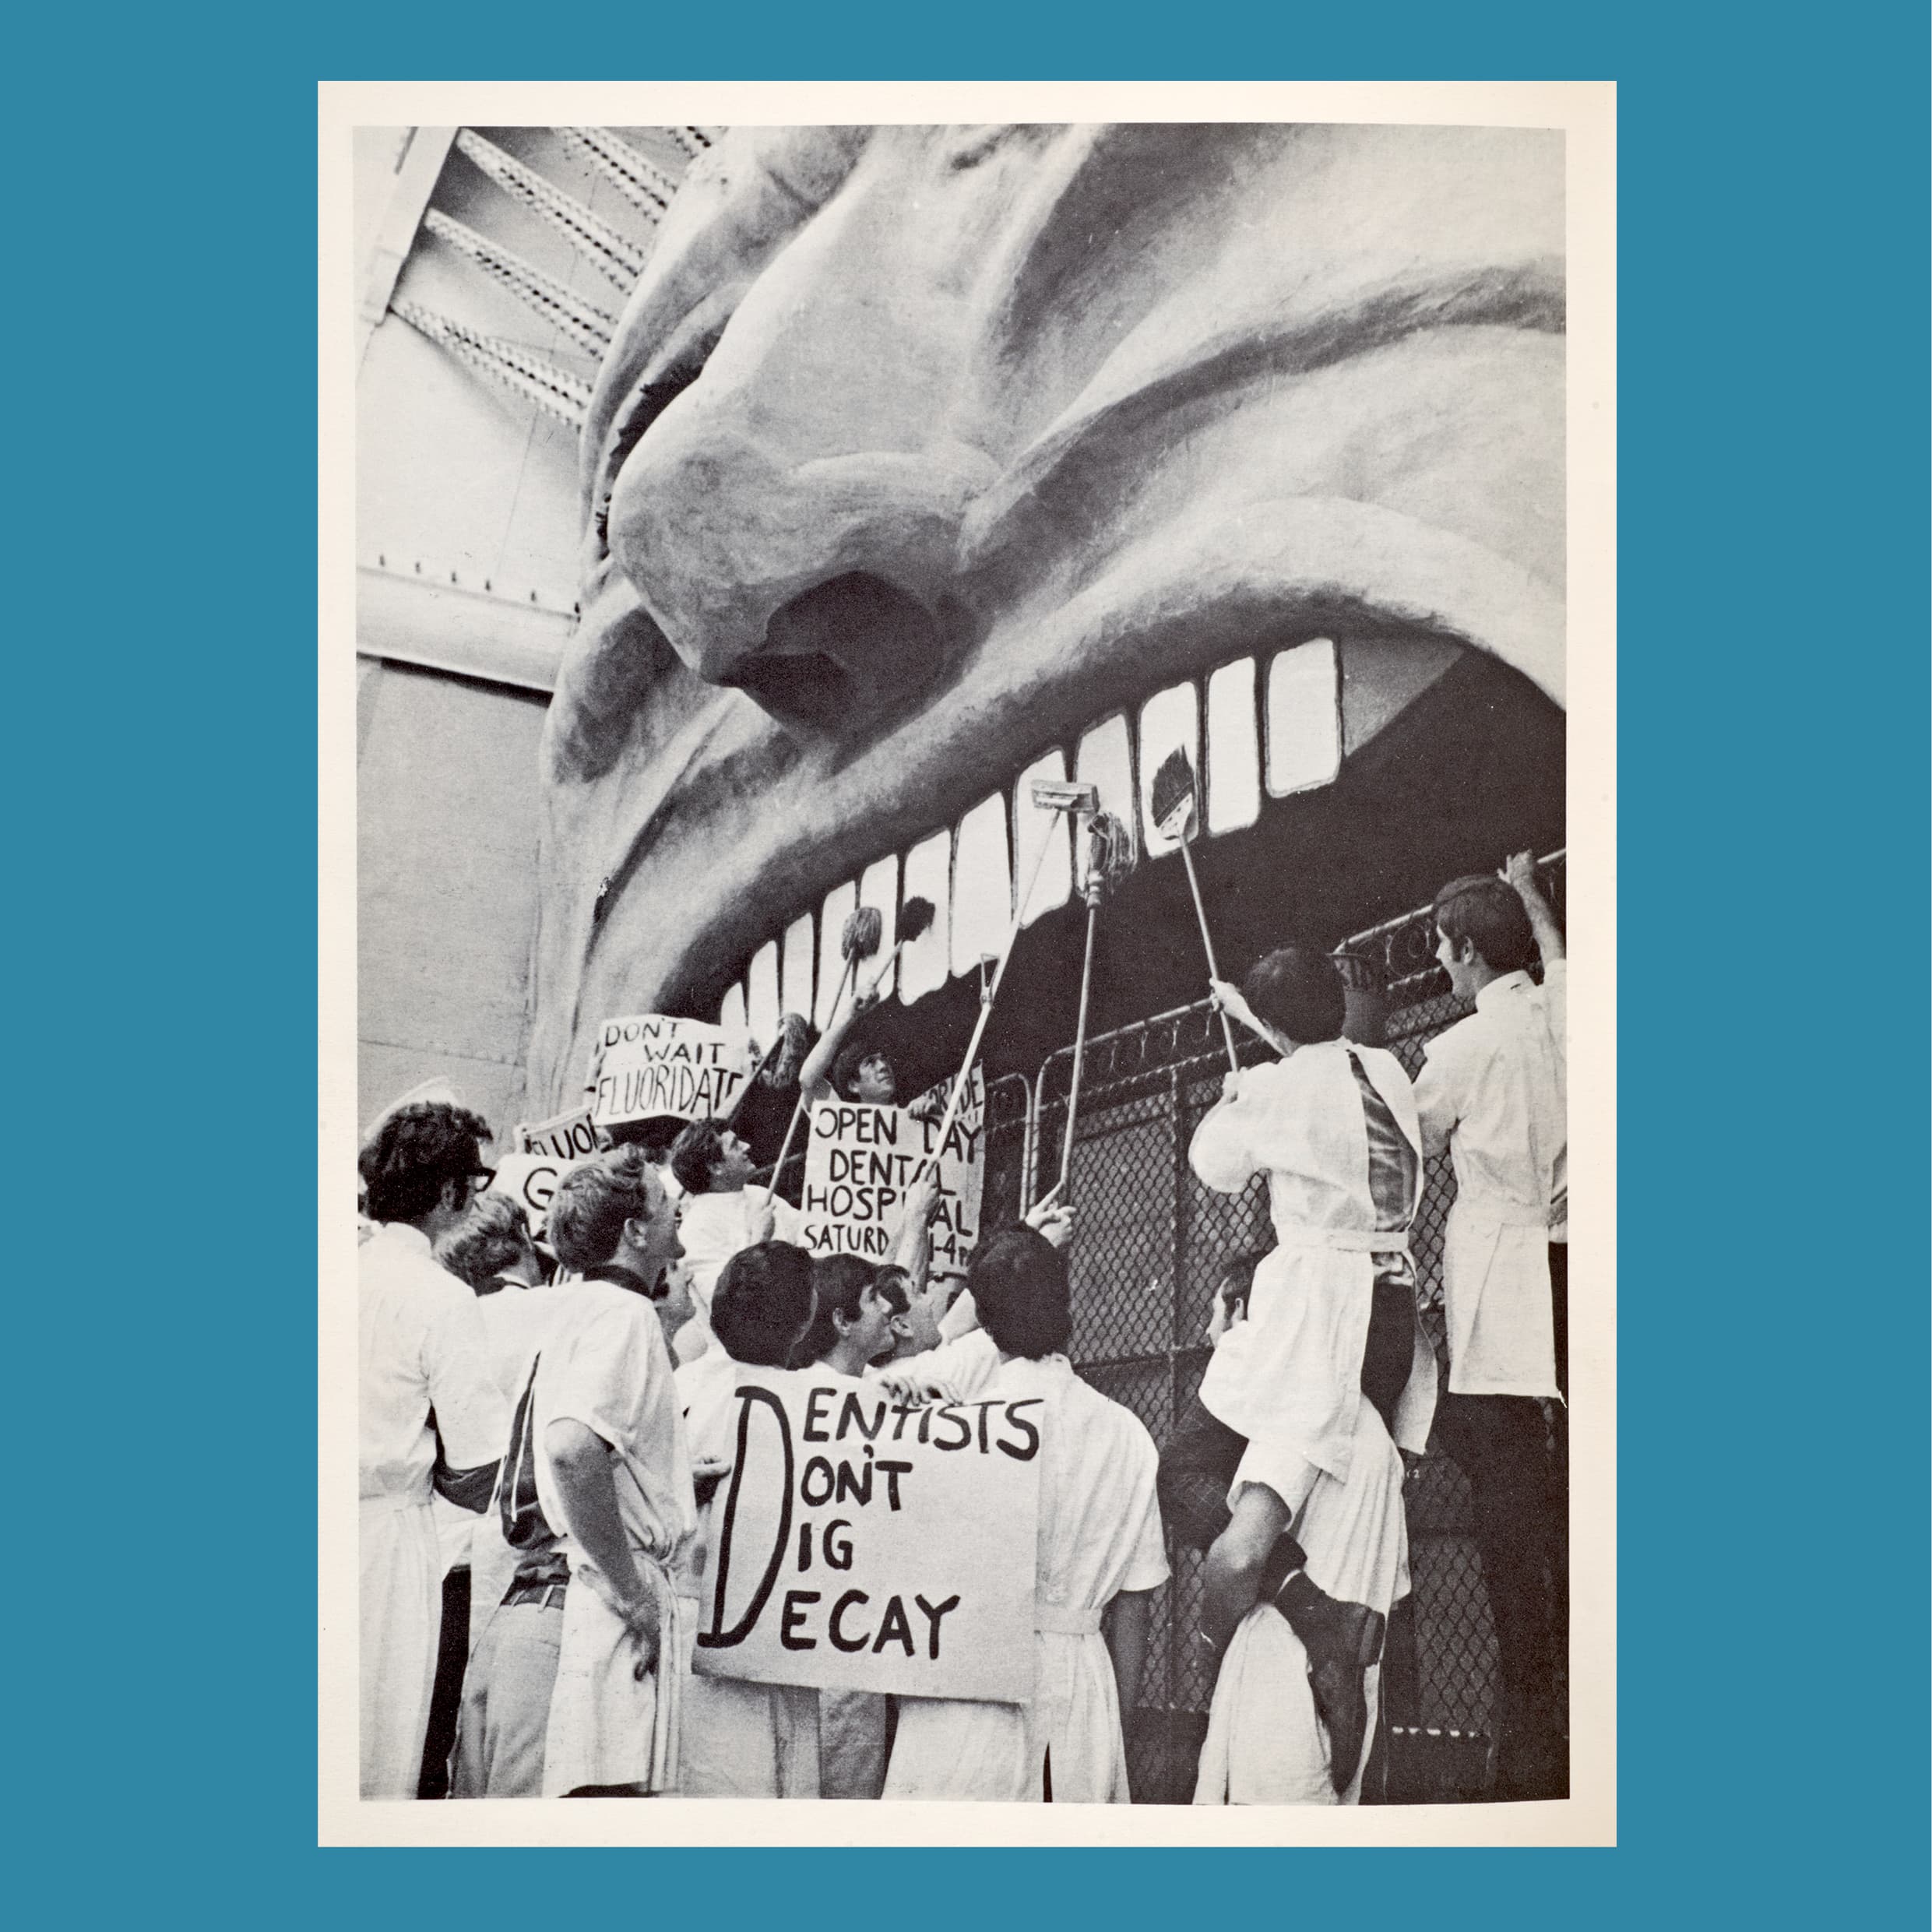 Melbourne Dental Students’ Society, Dentists don’t dig decay, published in The Mouth Mirror, 1969, print on paper, 26.0 × 20.5 cm. HFADM 3110.19, Henry Forman Atkinson Dental Museum, University of Melbourne.  

